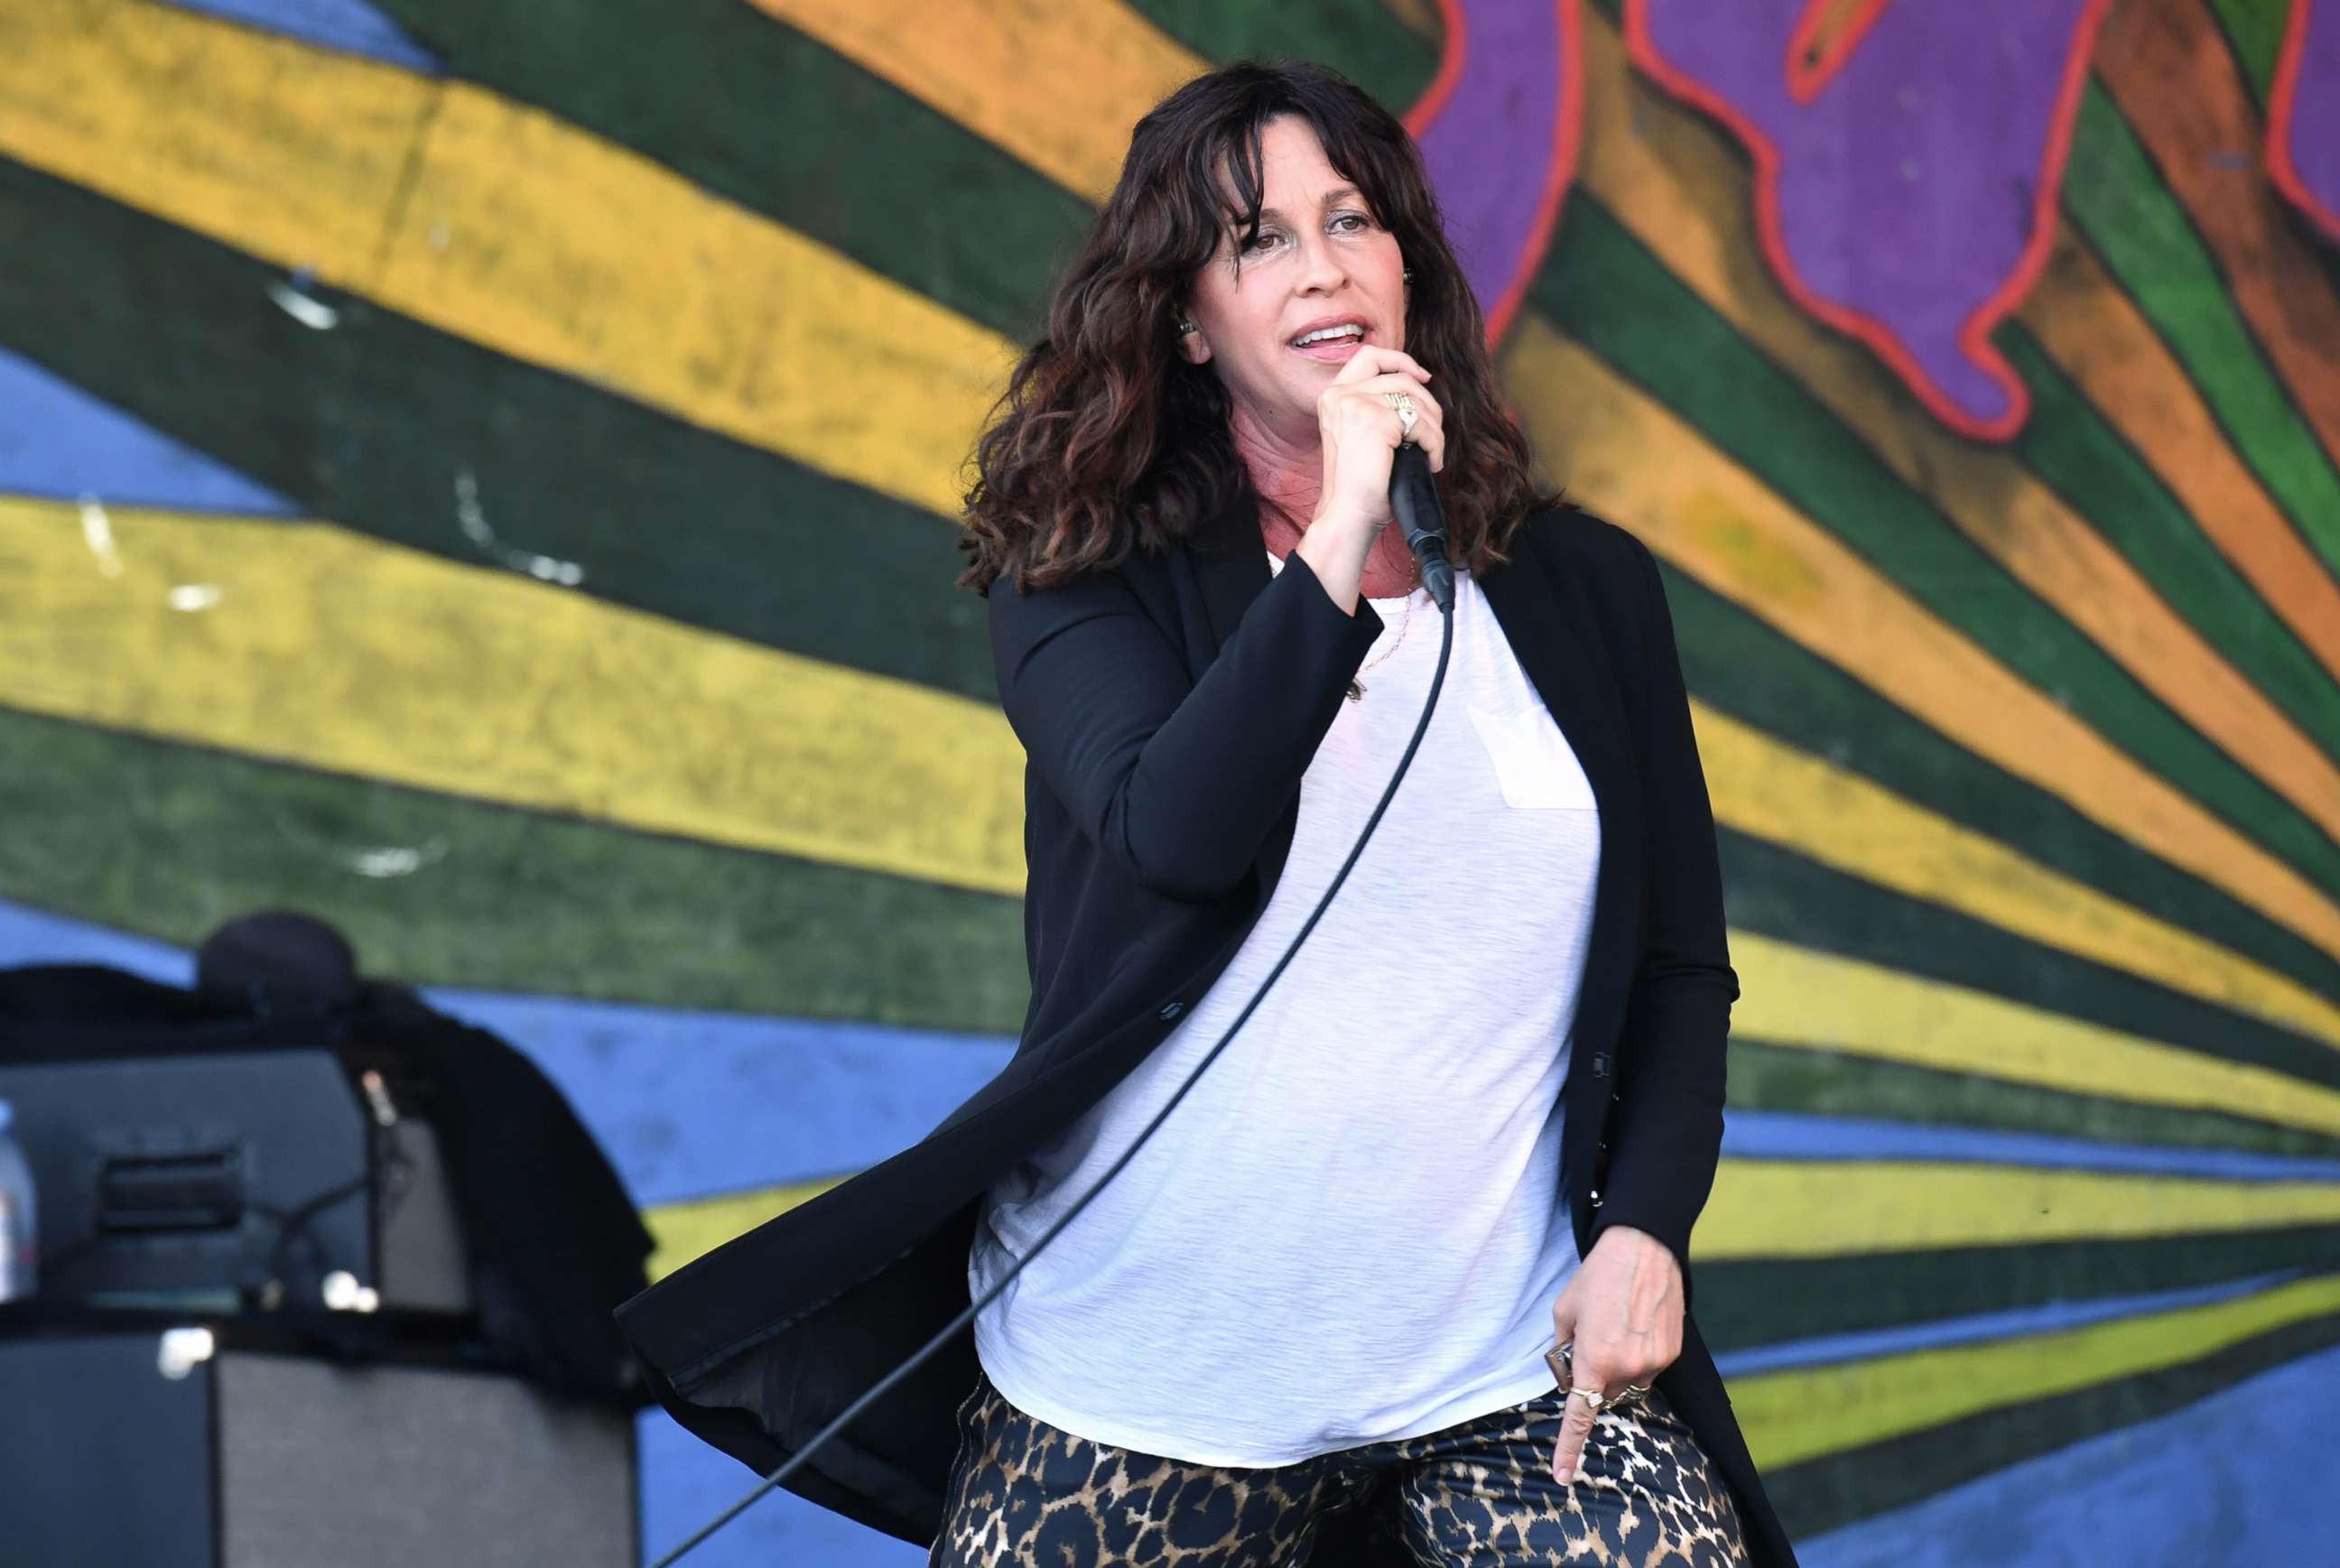 PHOTO: Alanis Morissette performs during the New Orleans Jazz and Heritage Festival, April 25, 2019 in New Orleans.